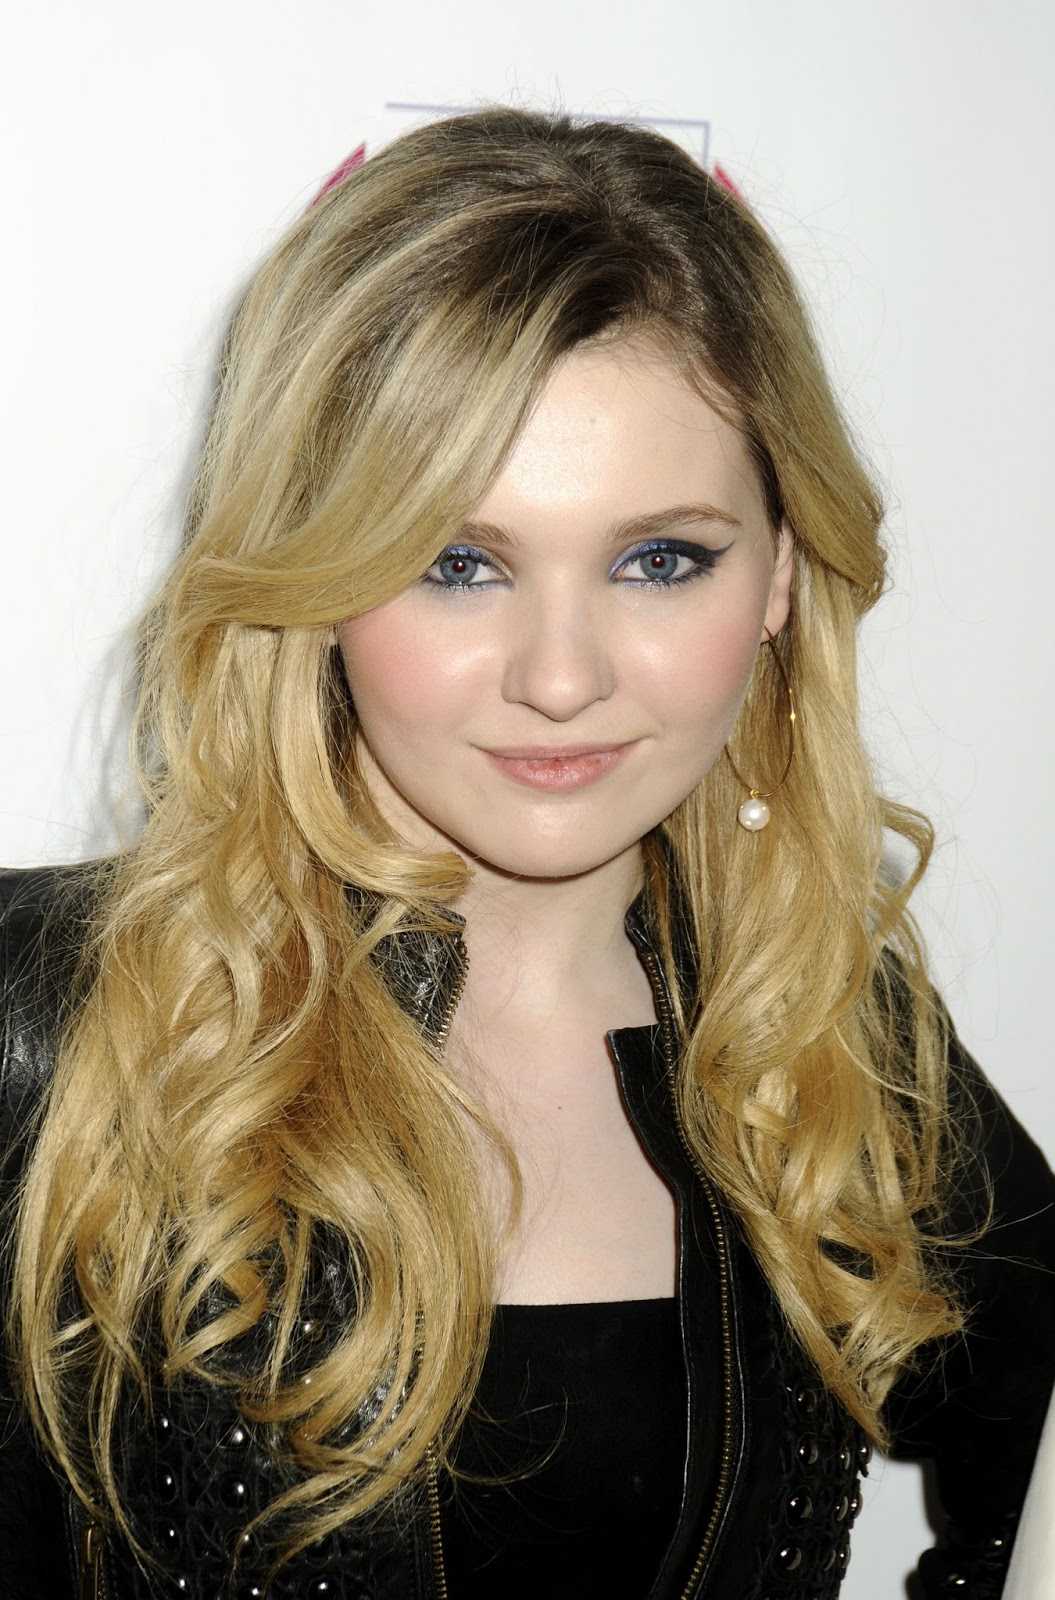 70+ Hot Pictures Of Abigail Breslin Are Epitome Of Sexiness 2